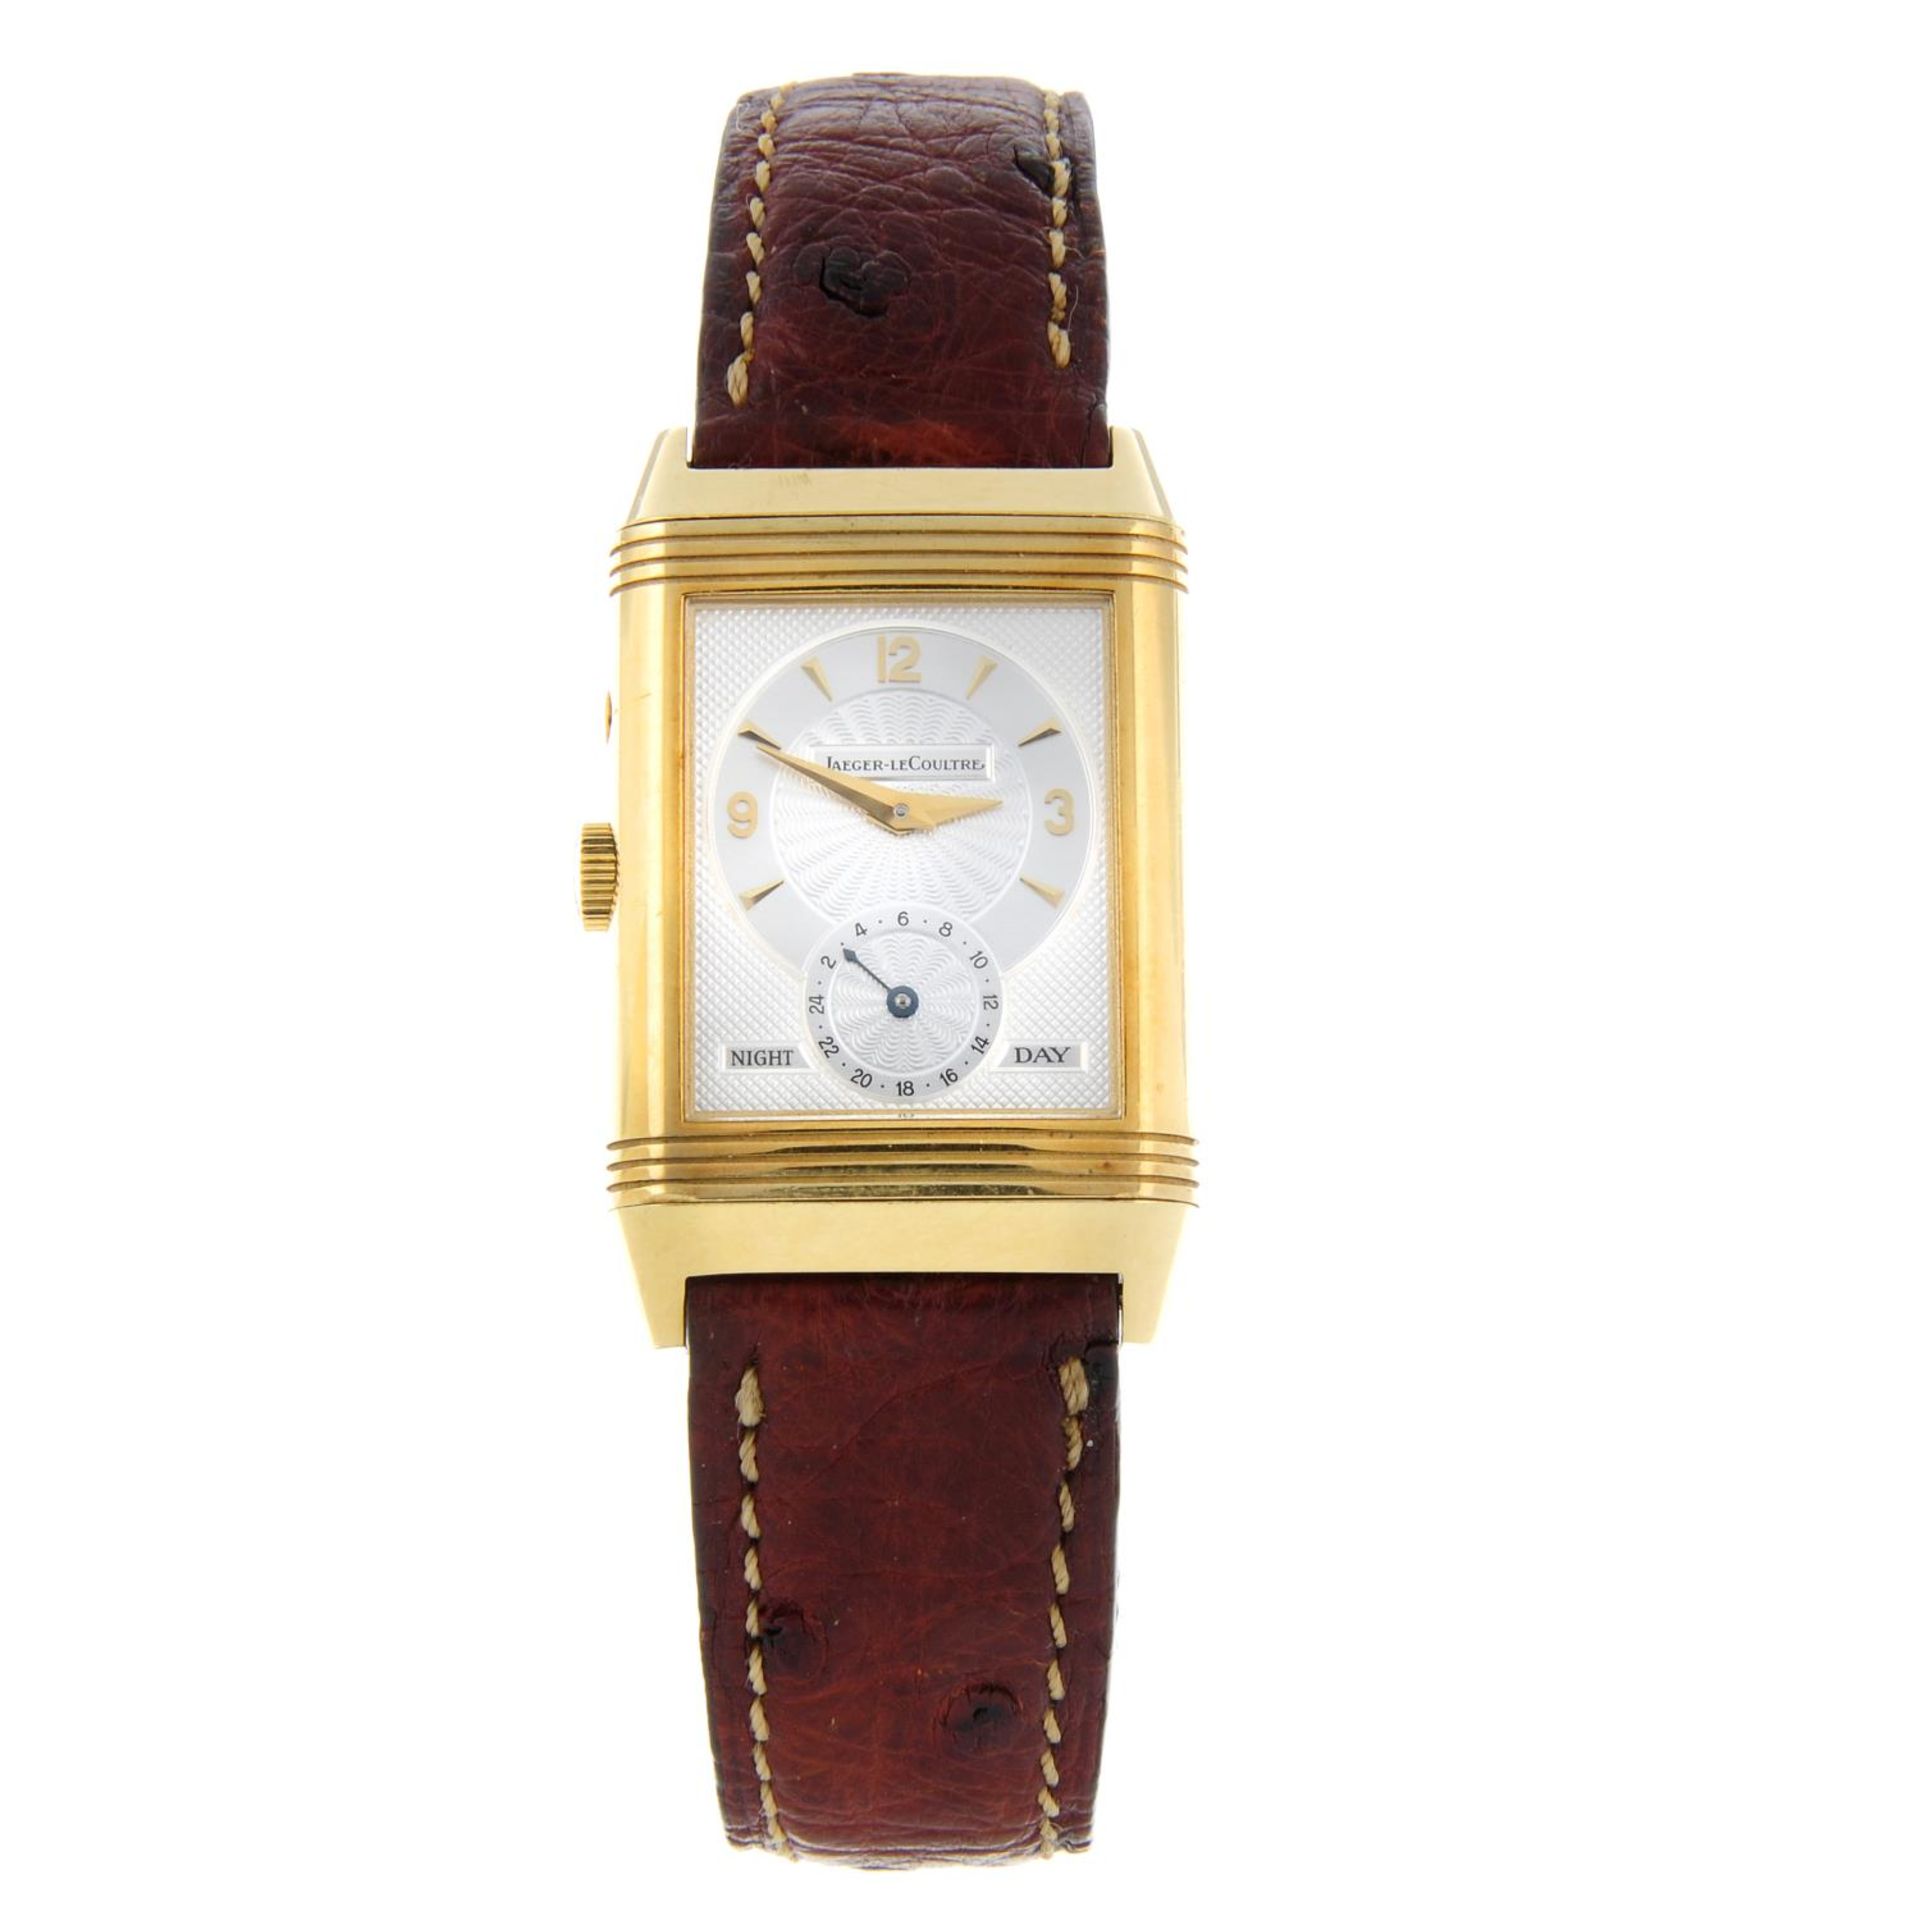 JAEGER-LECOULTRE - a gentleman's Reverso Night & Day wrist watch. - Image 5 of 6